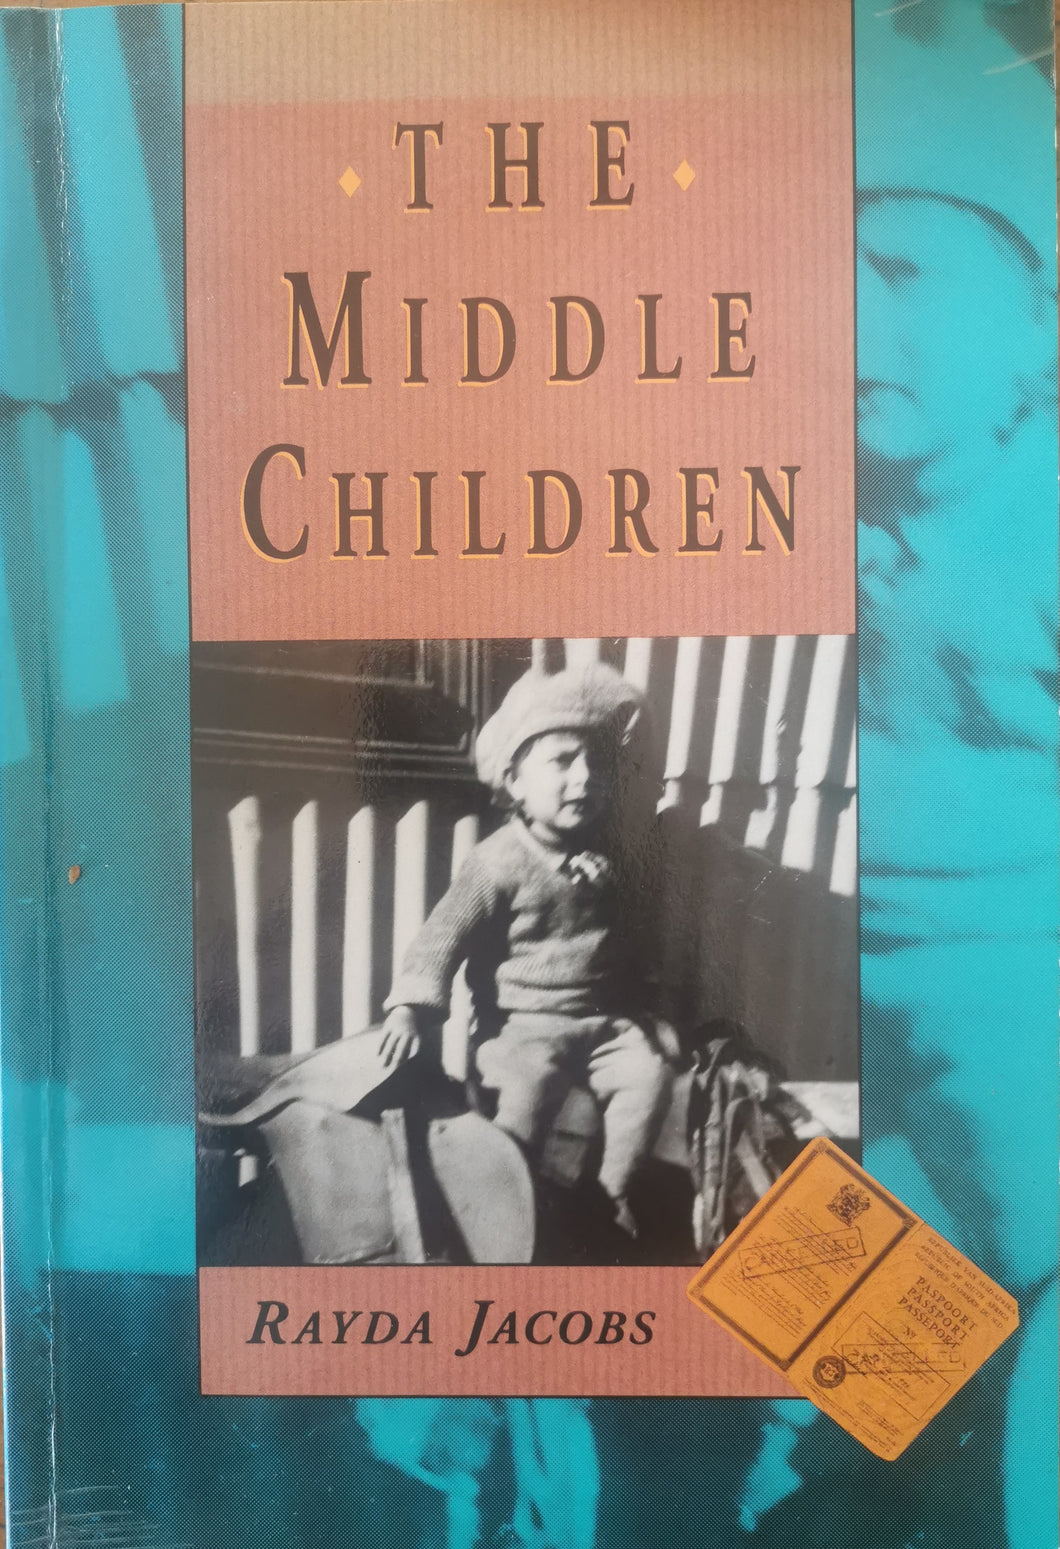 Rayda Jacobs - The Middle Children